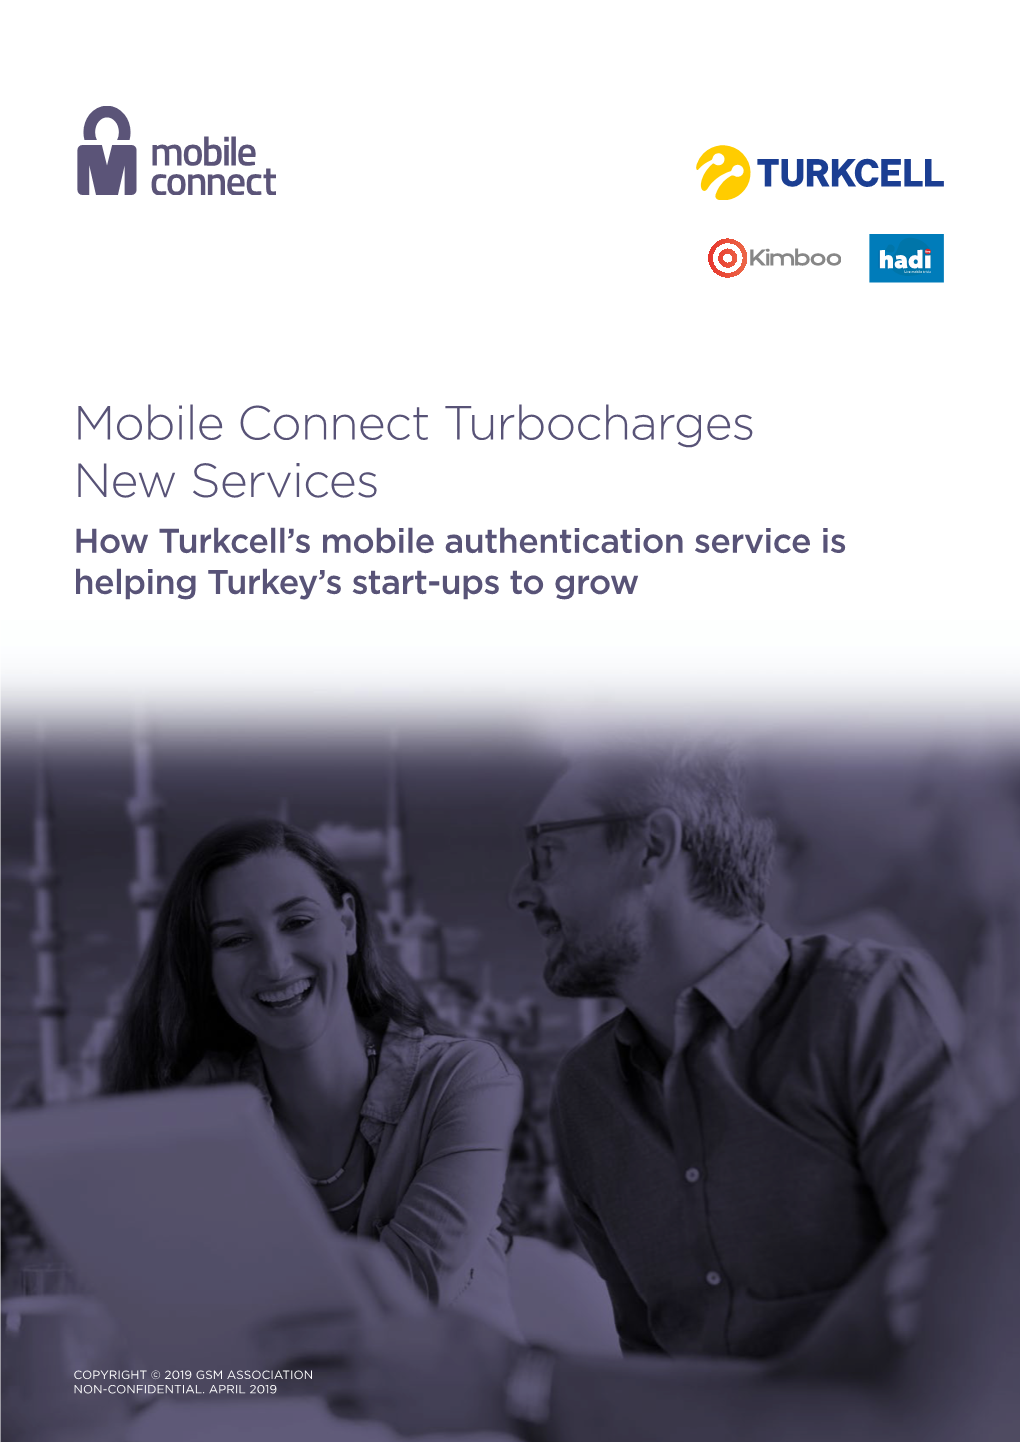 Mobile Connect Turbocharges New Services How Turkcell’S Mobile Authentication Service Is Helping Turkey’S Start-Ups to Grow